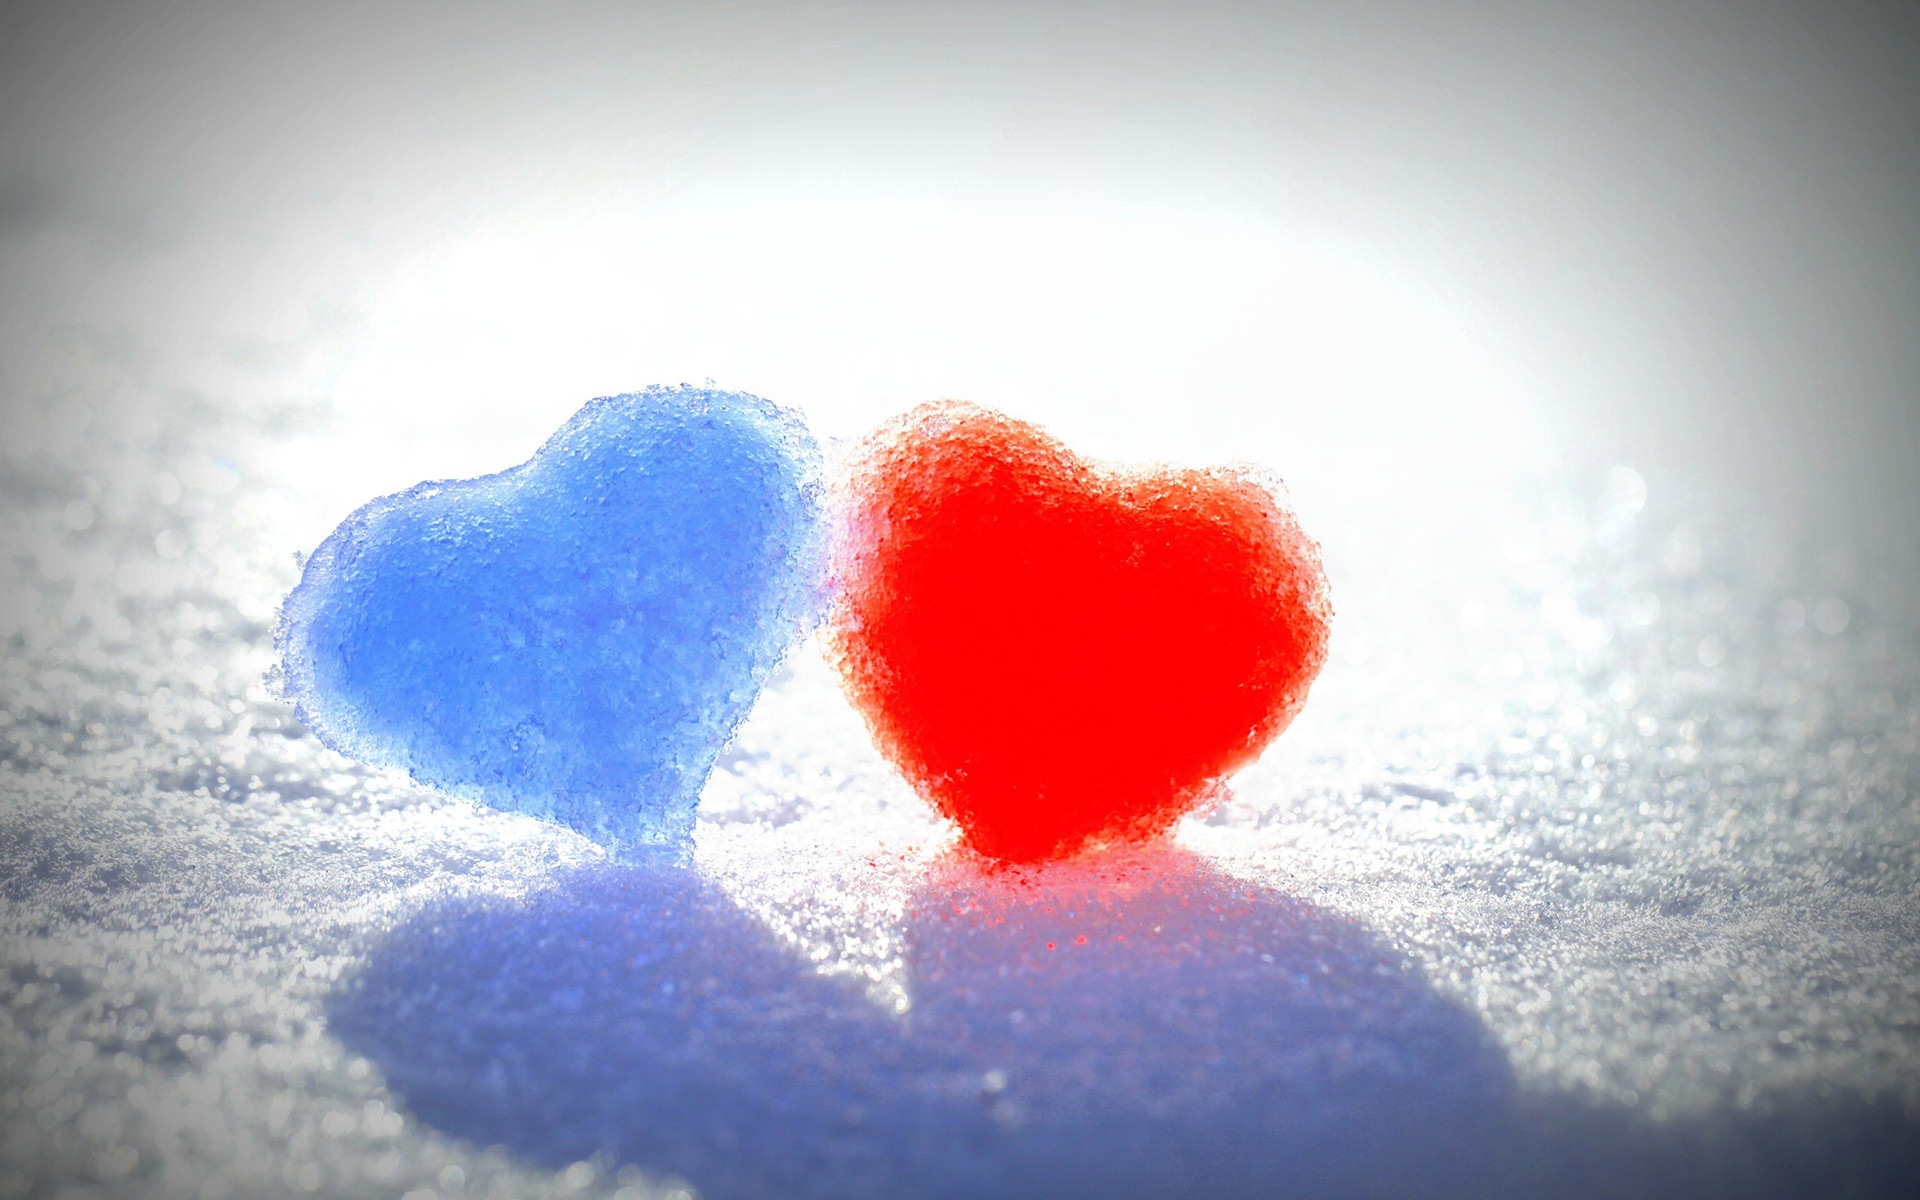 The theme of love, creative heart-shaped HD wallpapers #13 - 1920x1200